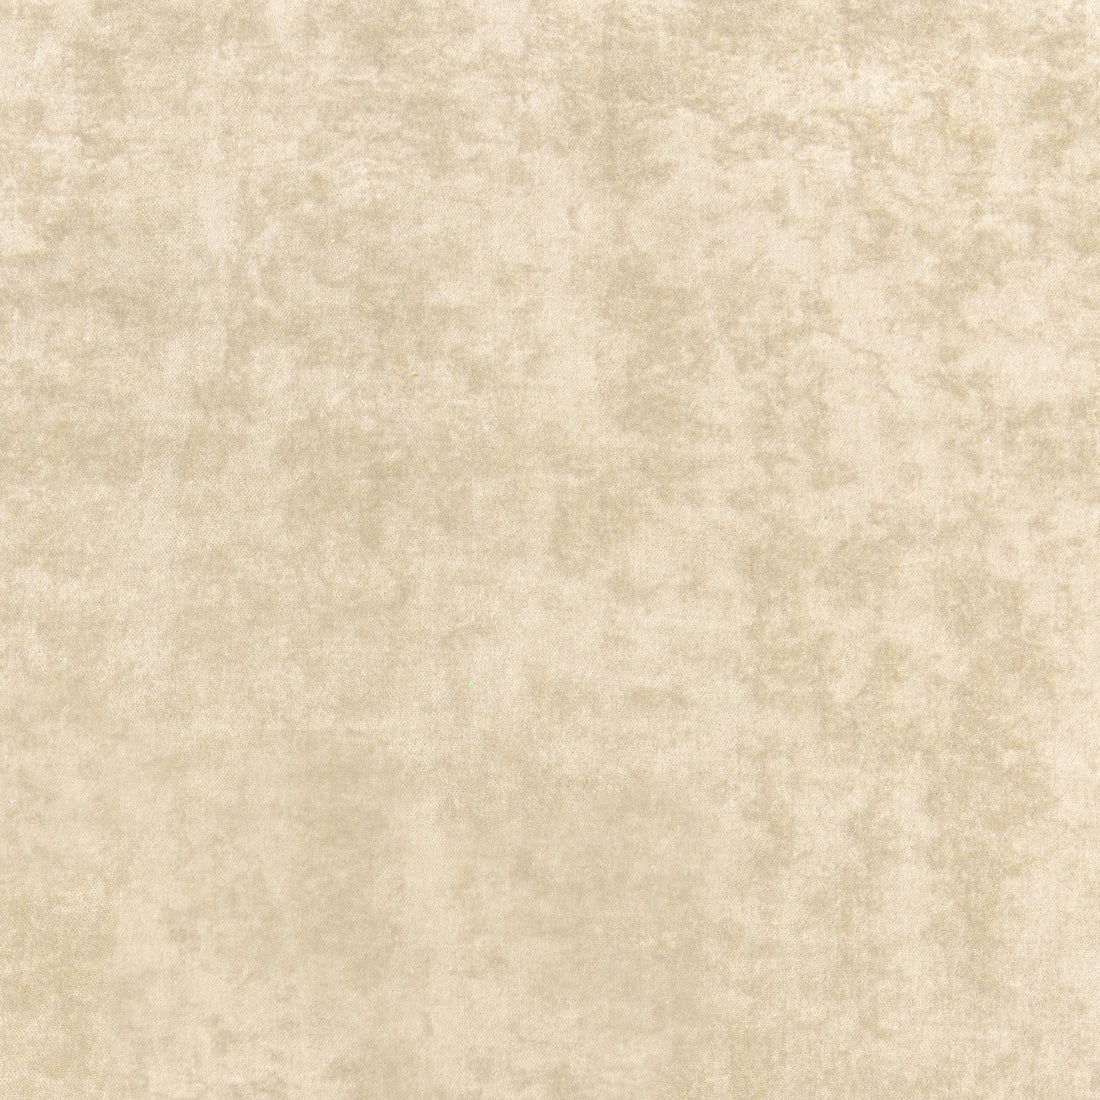 Celeste Velvet fabric in sand color - pattern number W8967 - by Thibaut in the Lyra Velvets collection